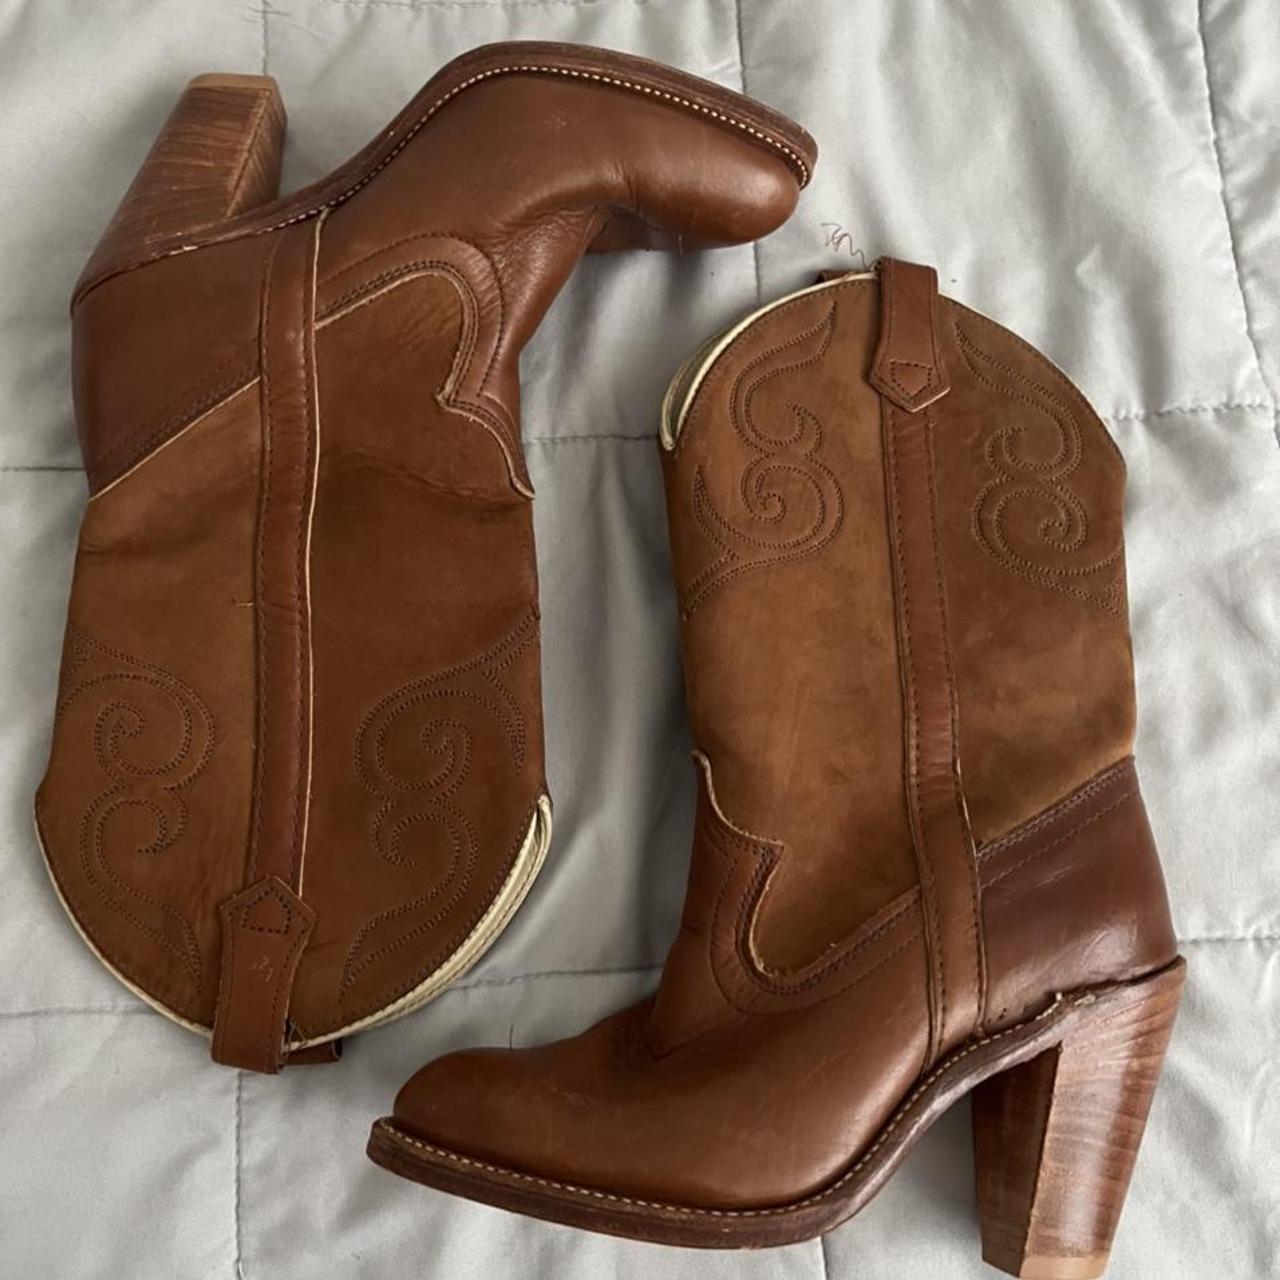 Dingo 1969 Women's Brown and Tan Boots